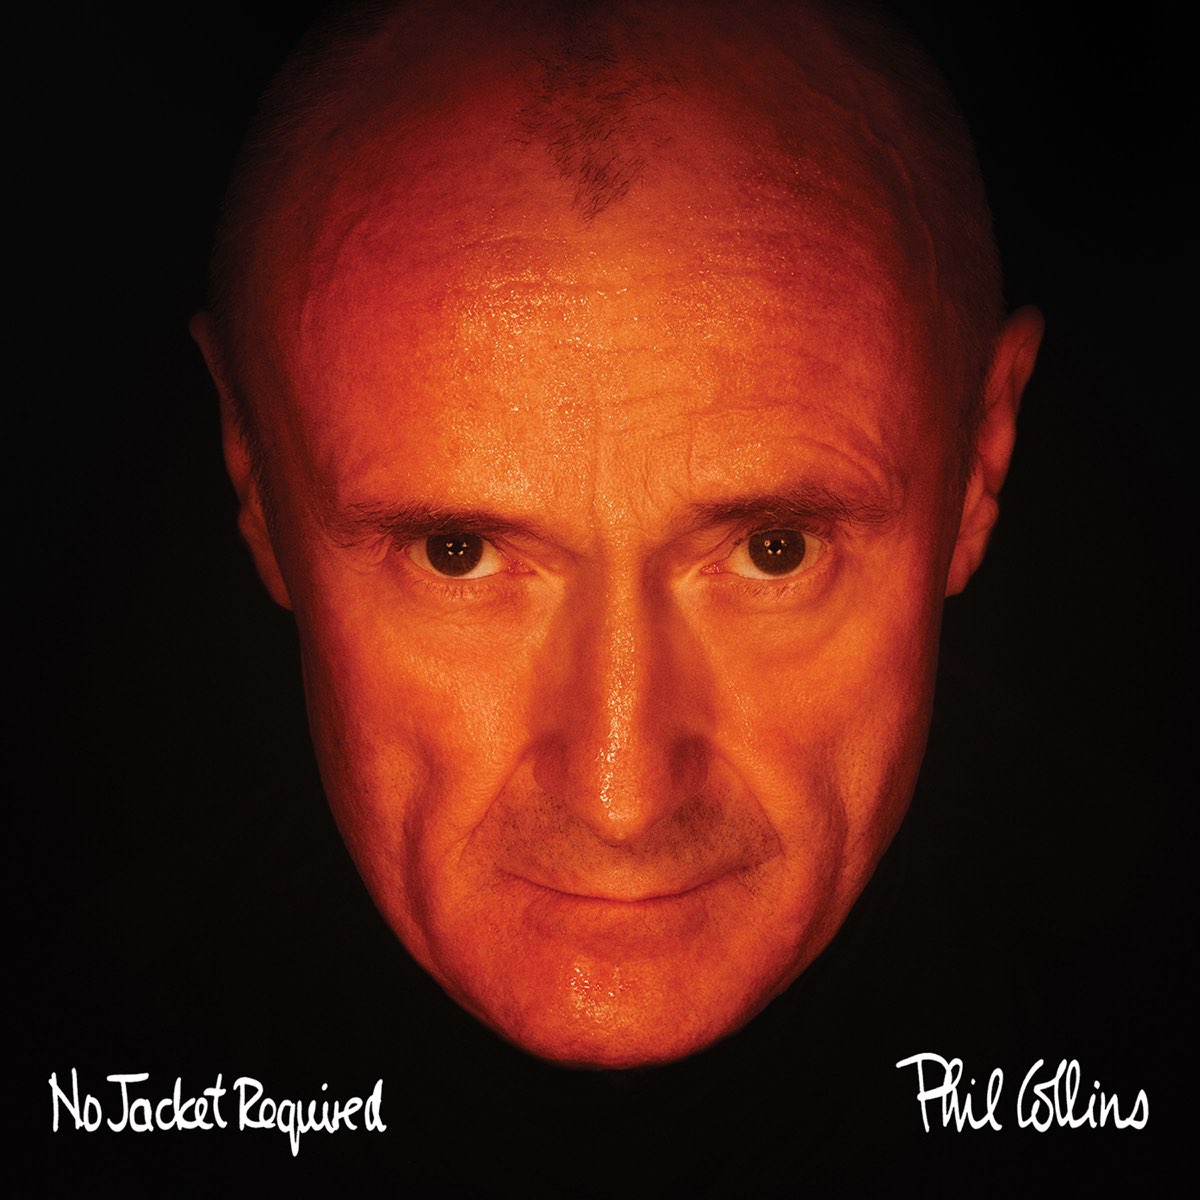 phil collins no jacket required tour